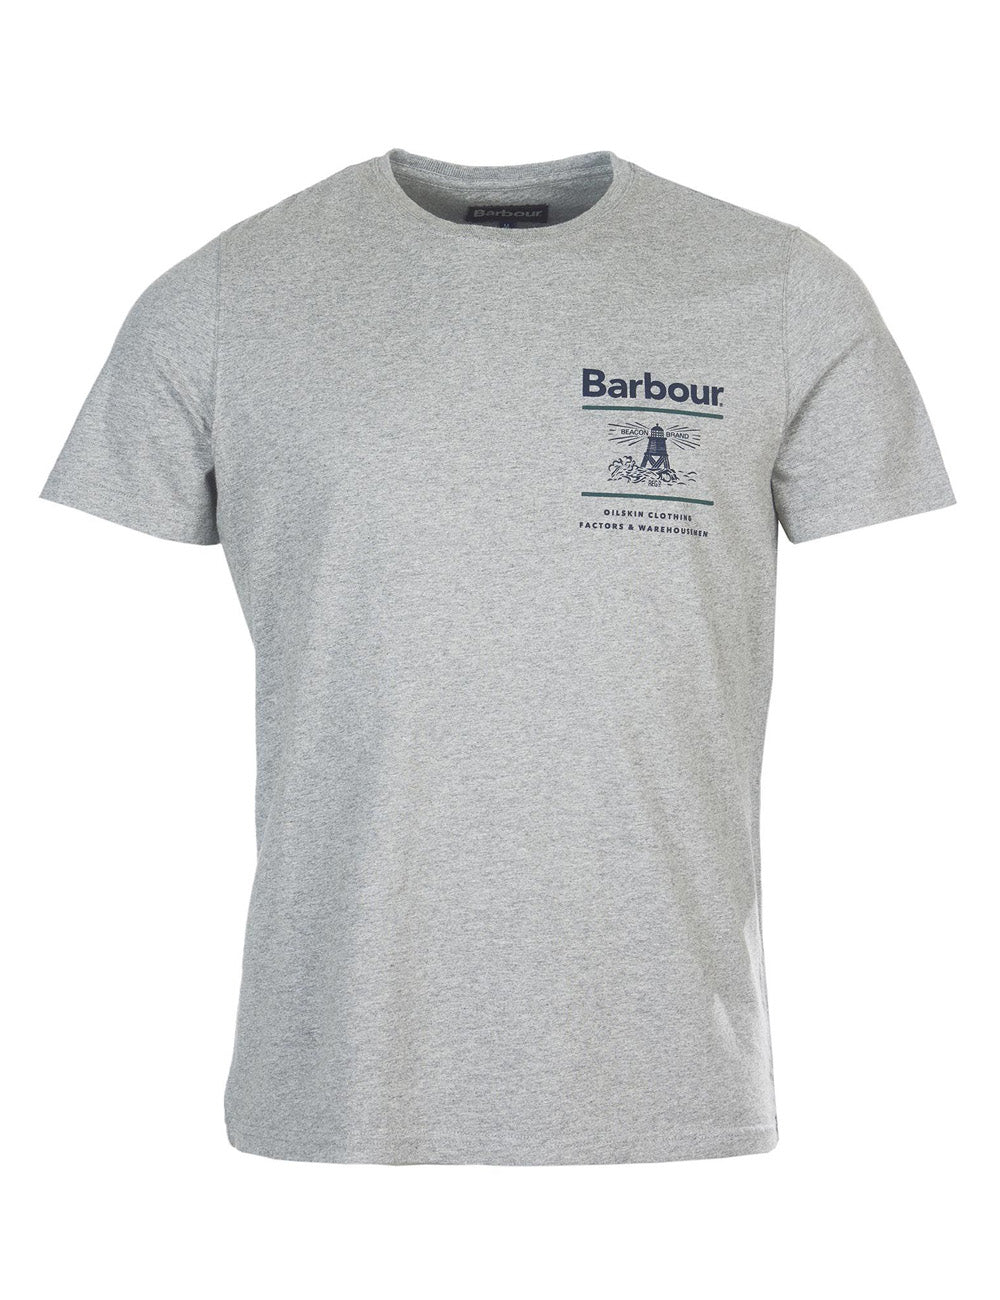 Barbour Reed T-Shirt - Grey Marl